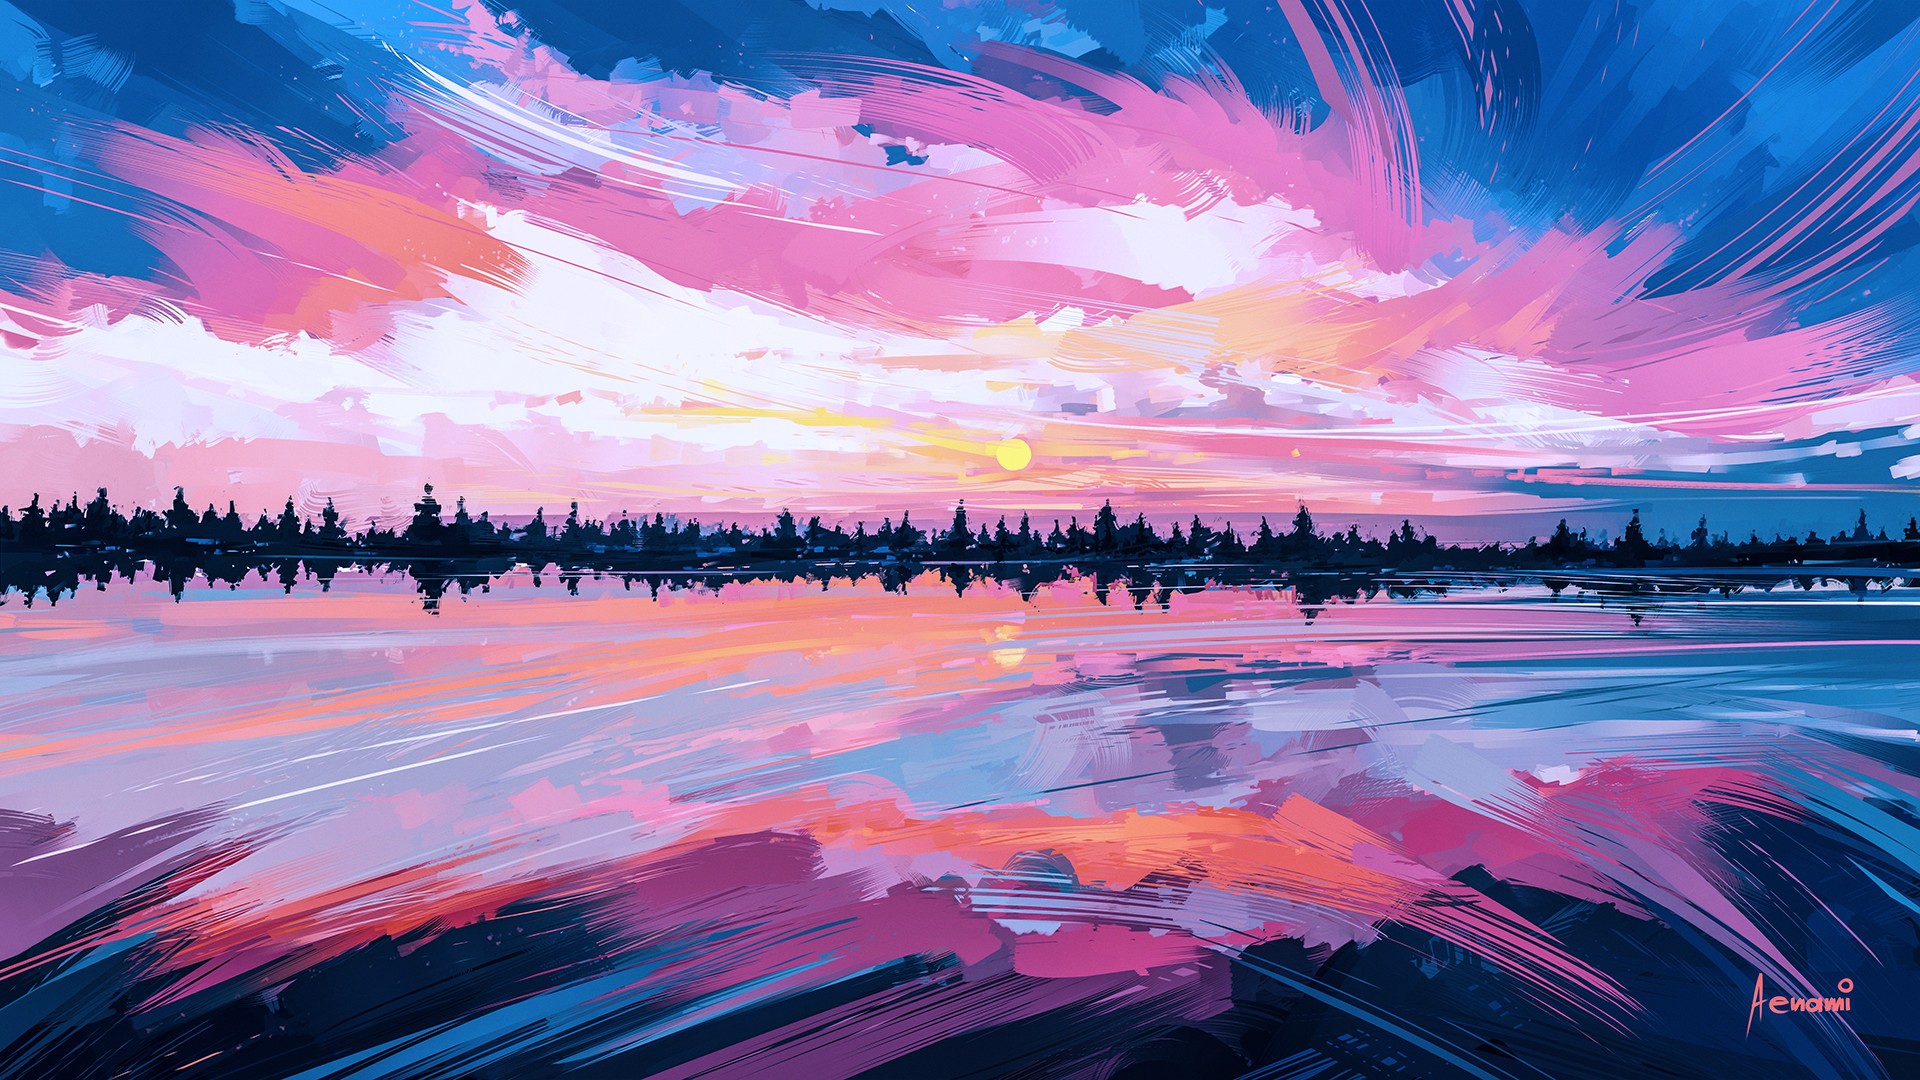 Artistic Painting HD Wallpaper | Background Image | 1920x1080